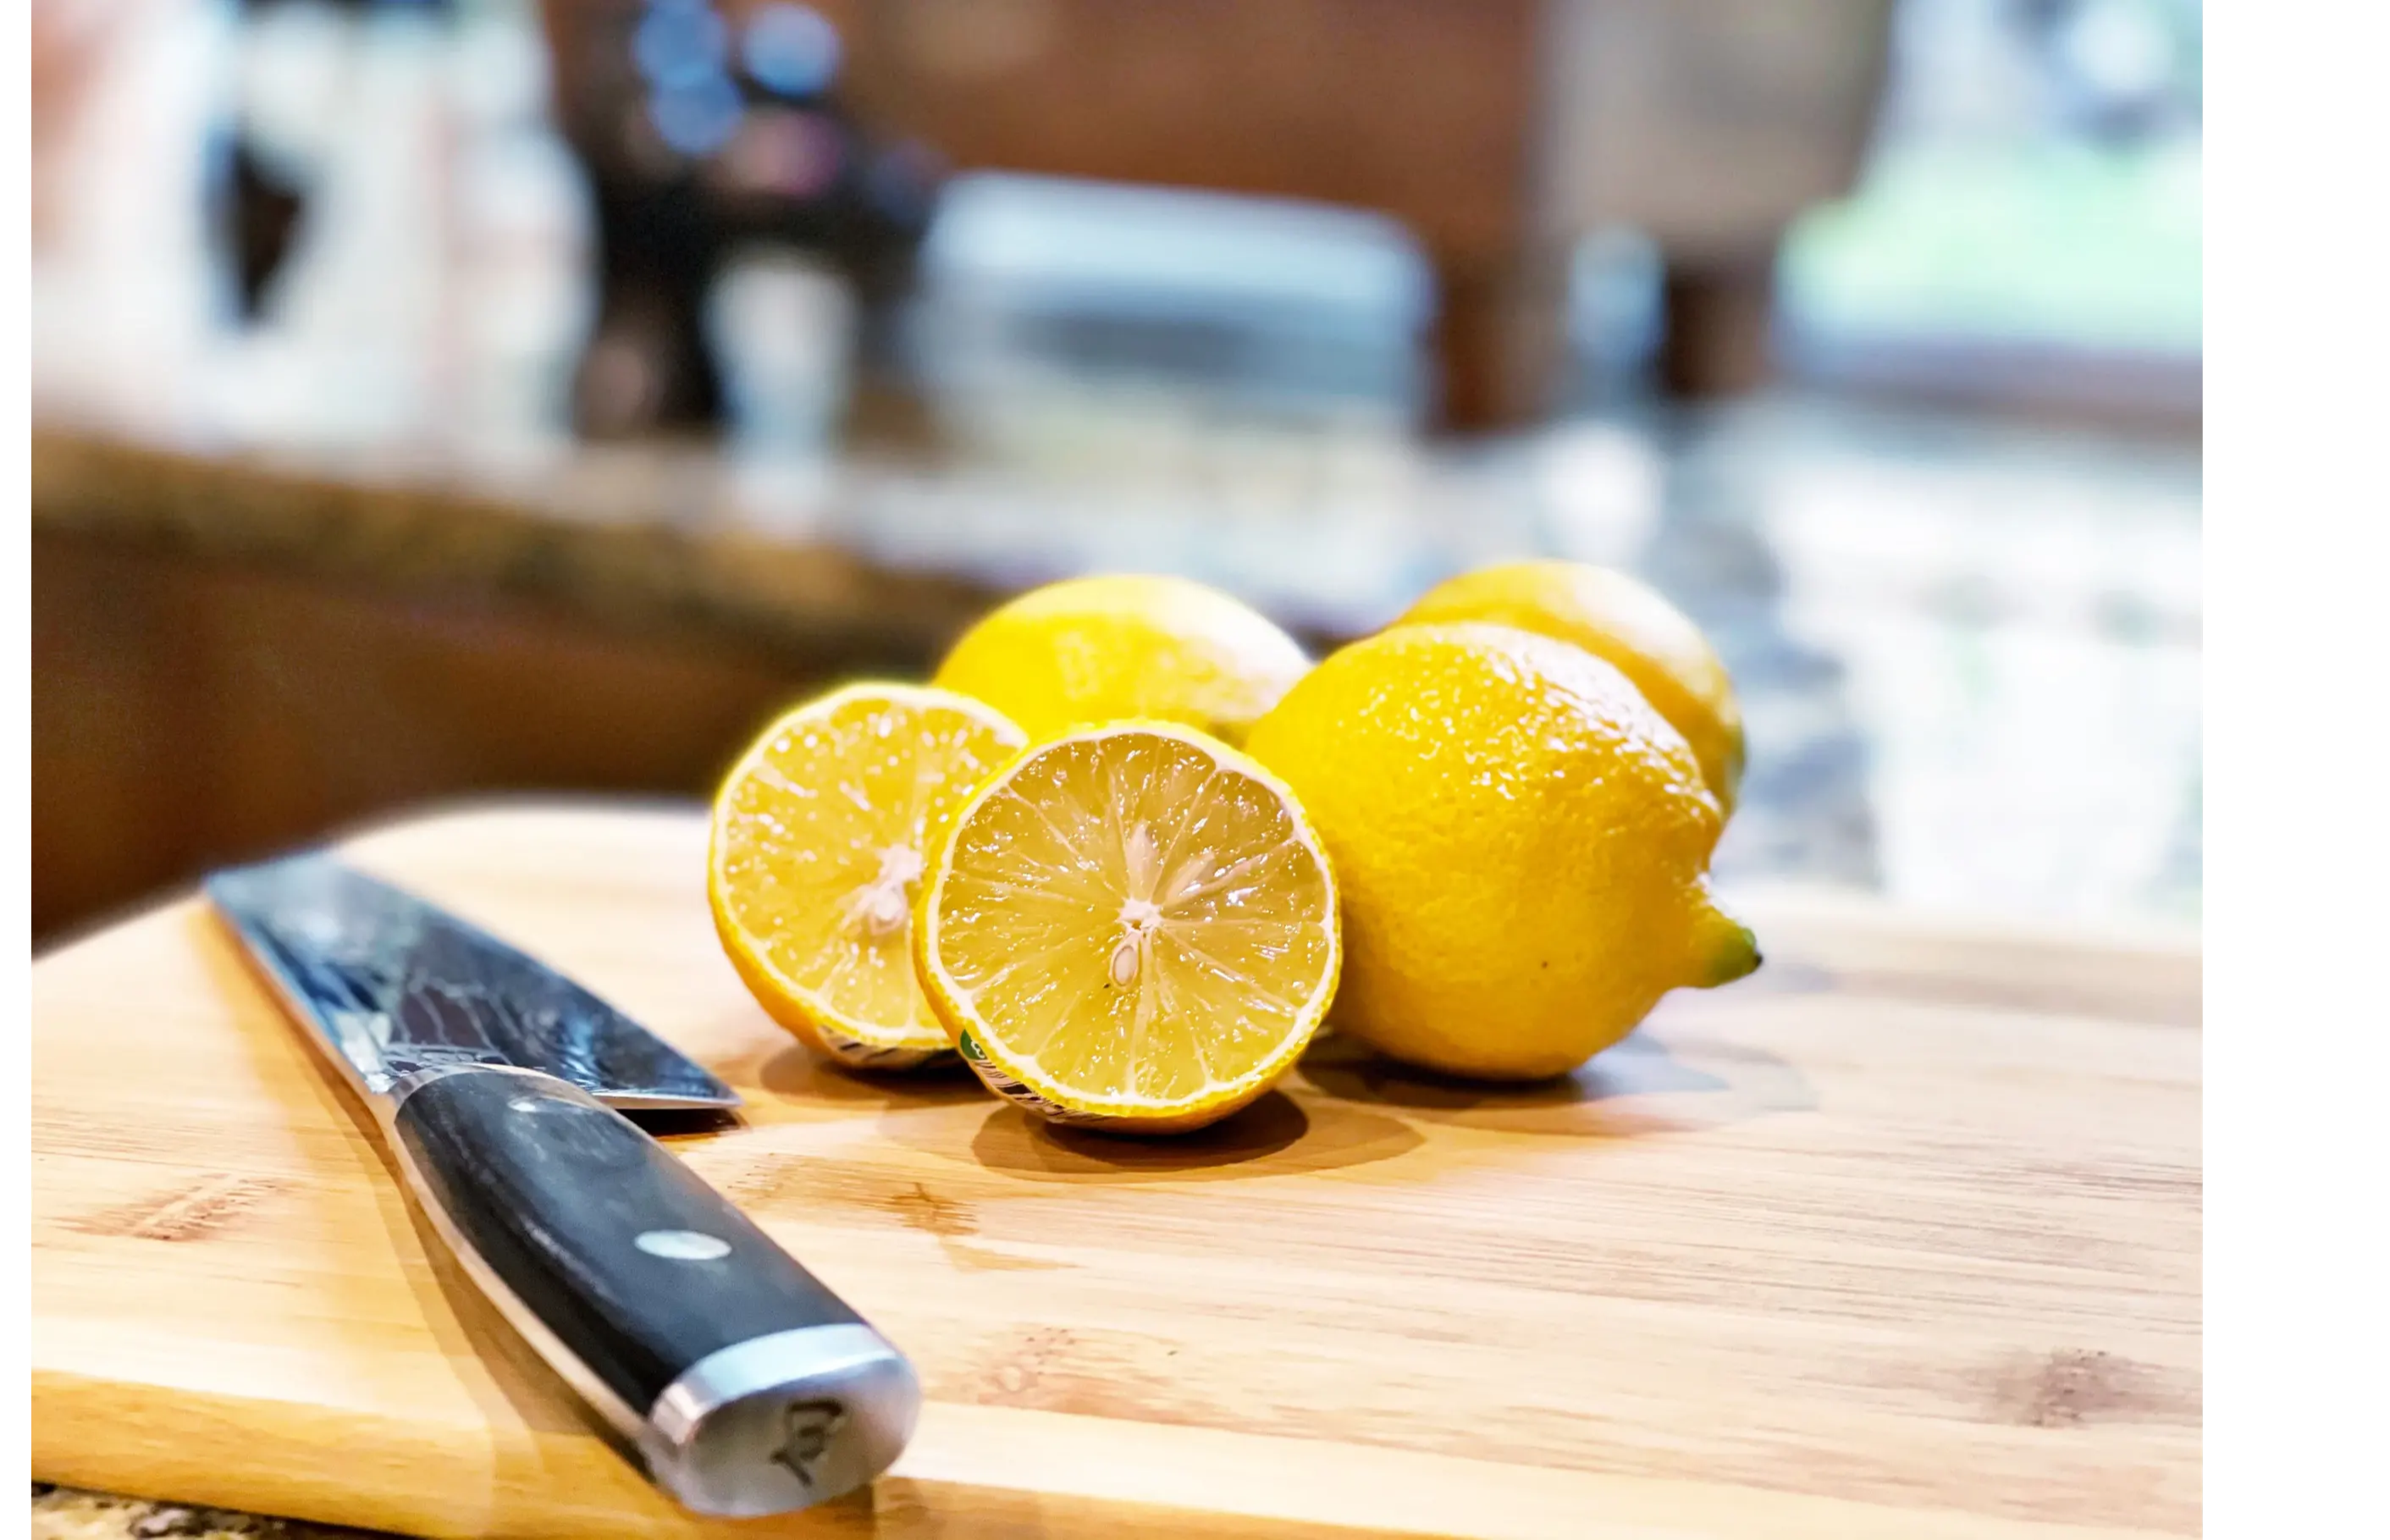 How to use lemons in the kitchen to clean